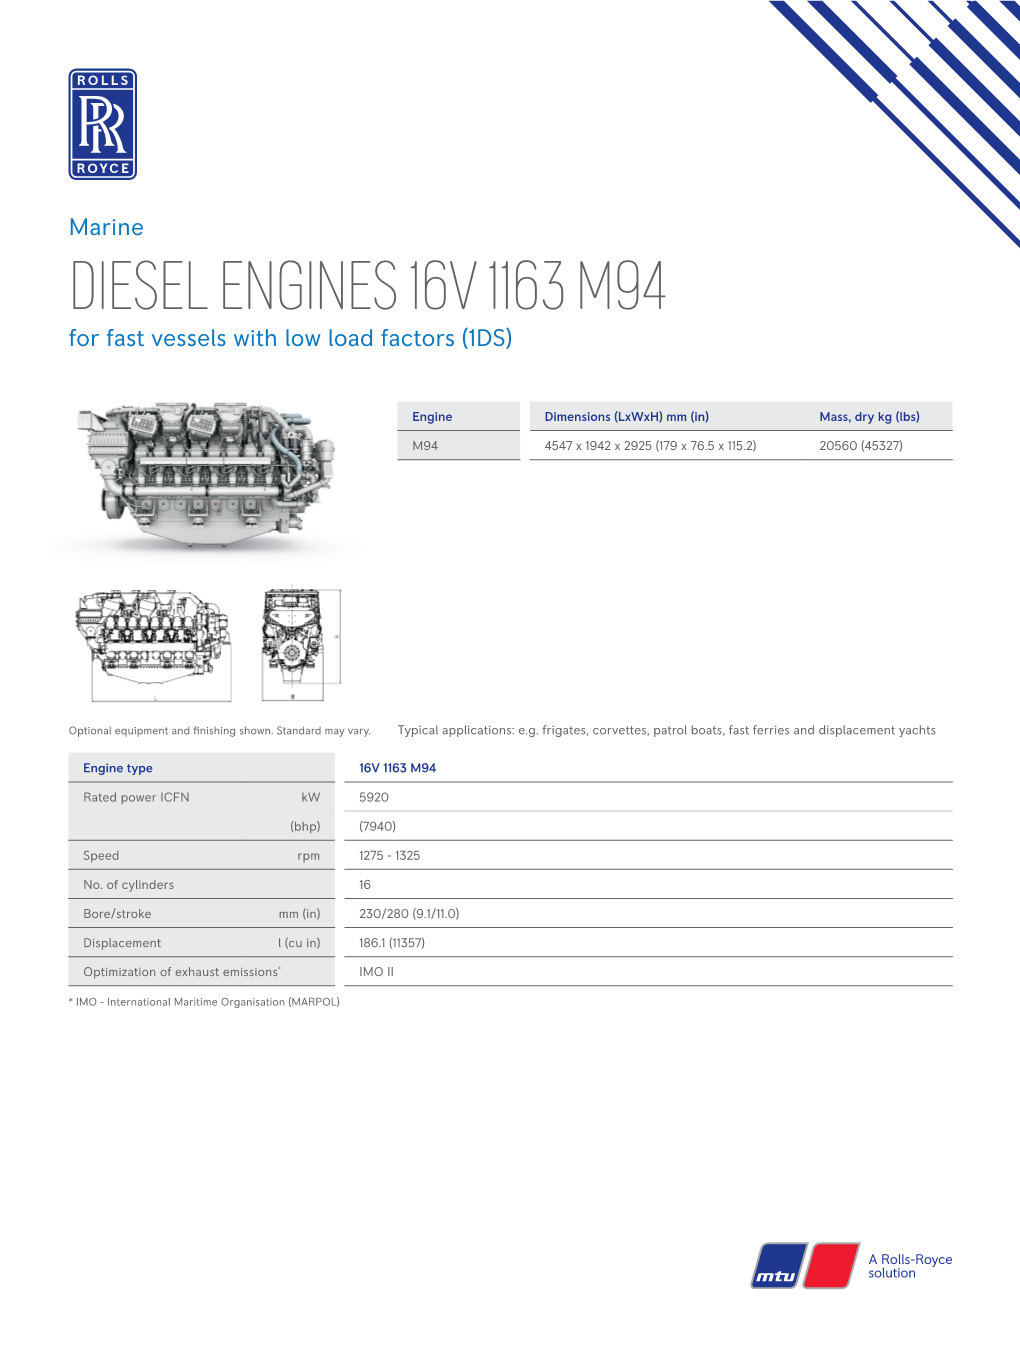 DIESEL ENGINES 16V 1163 M94 for Fast Vessels with Low Load Factors (1DS)